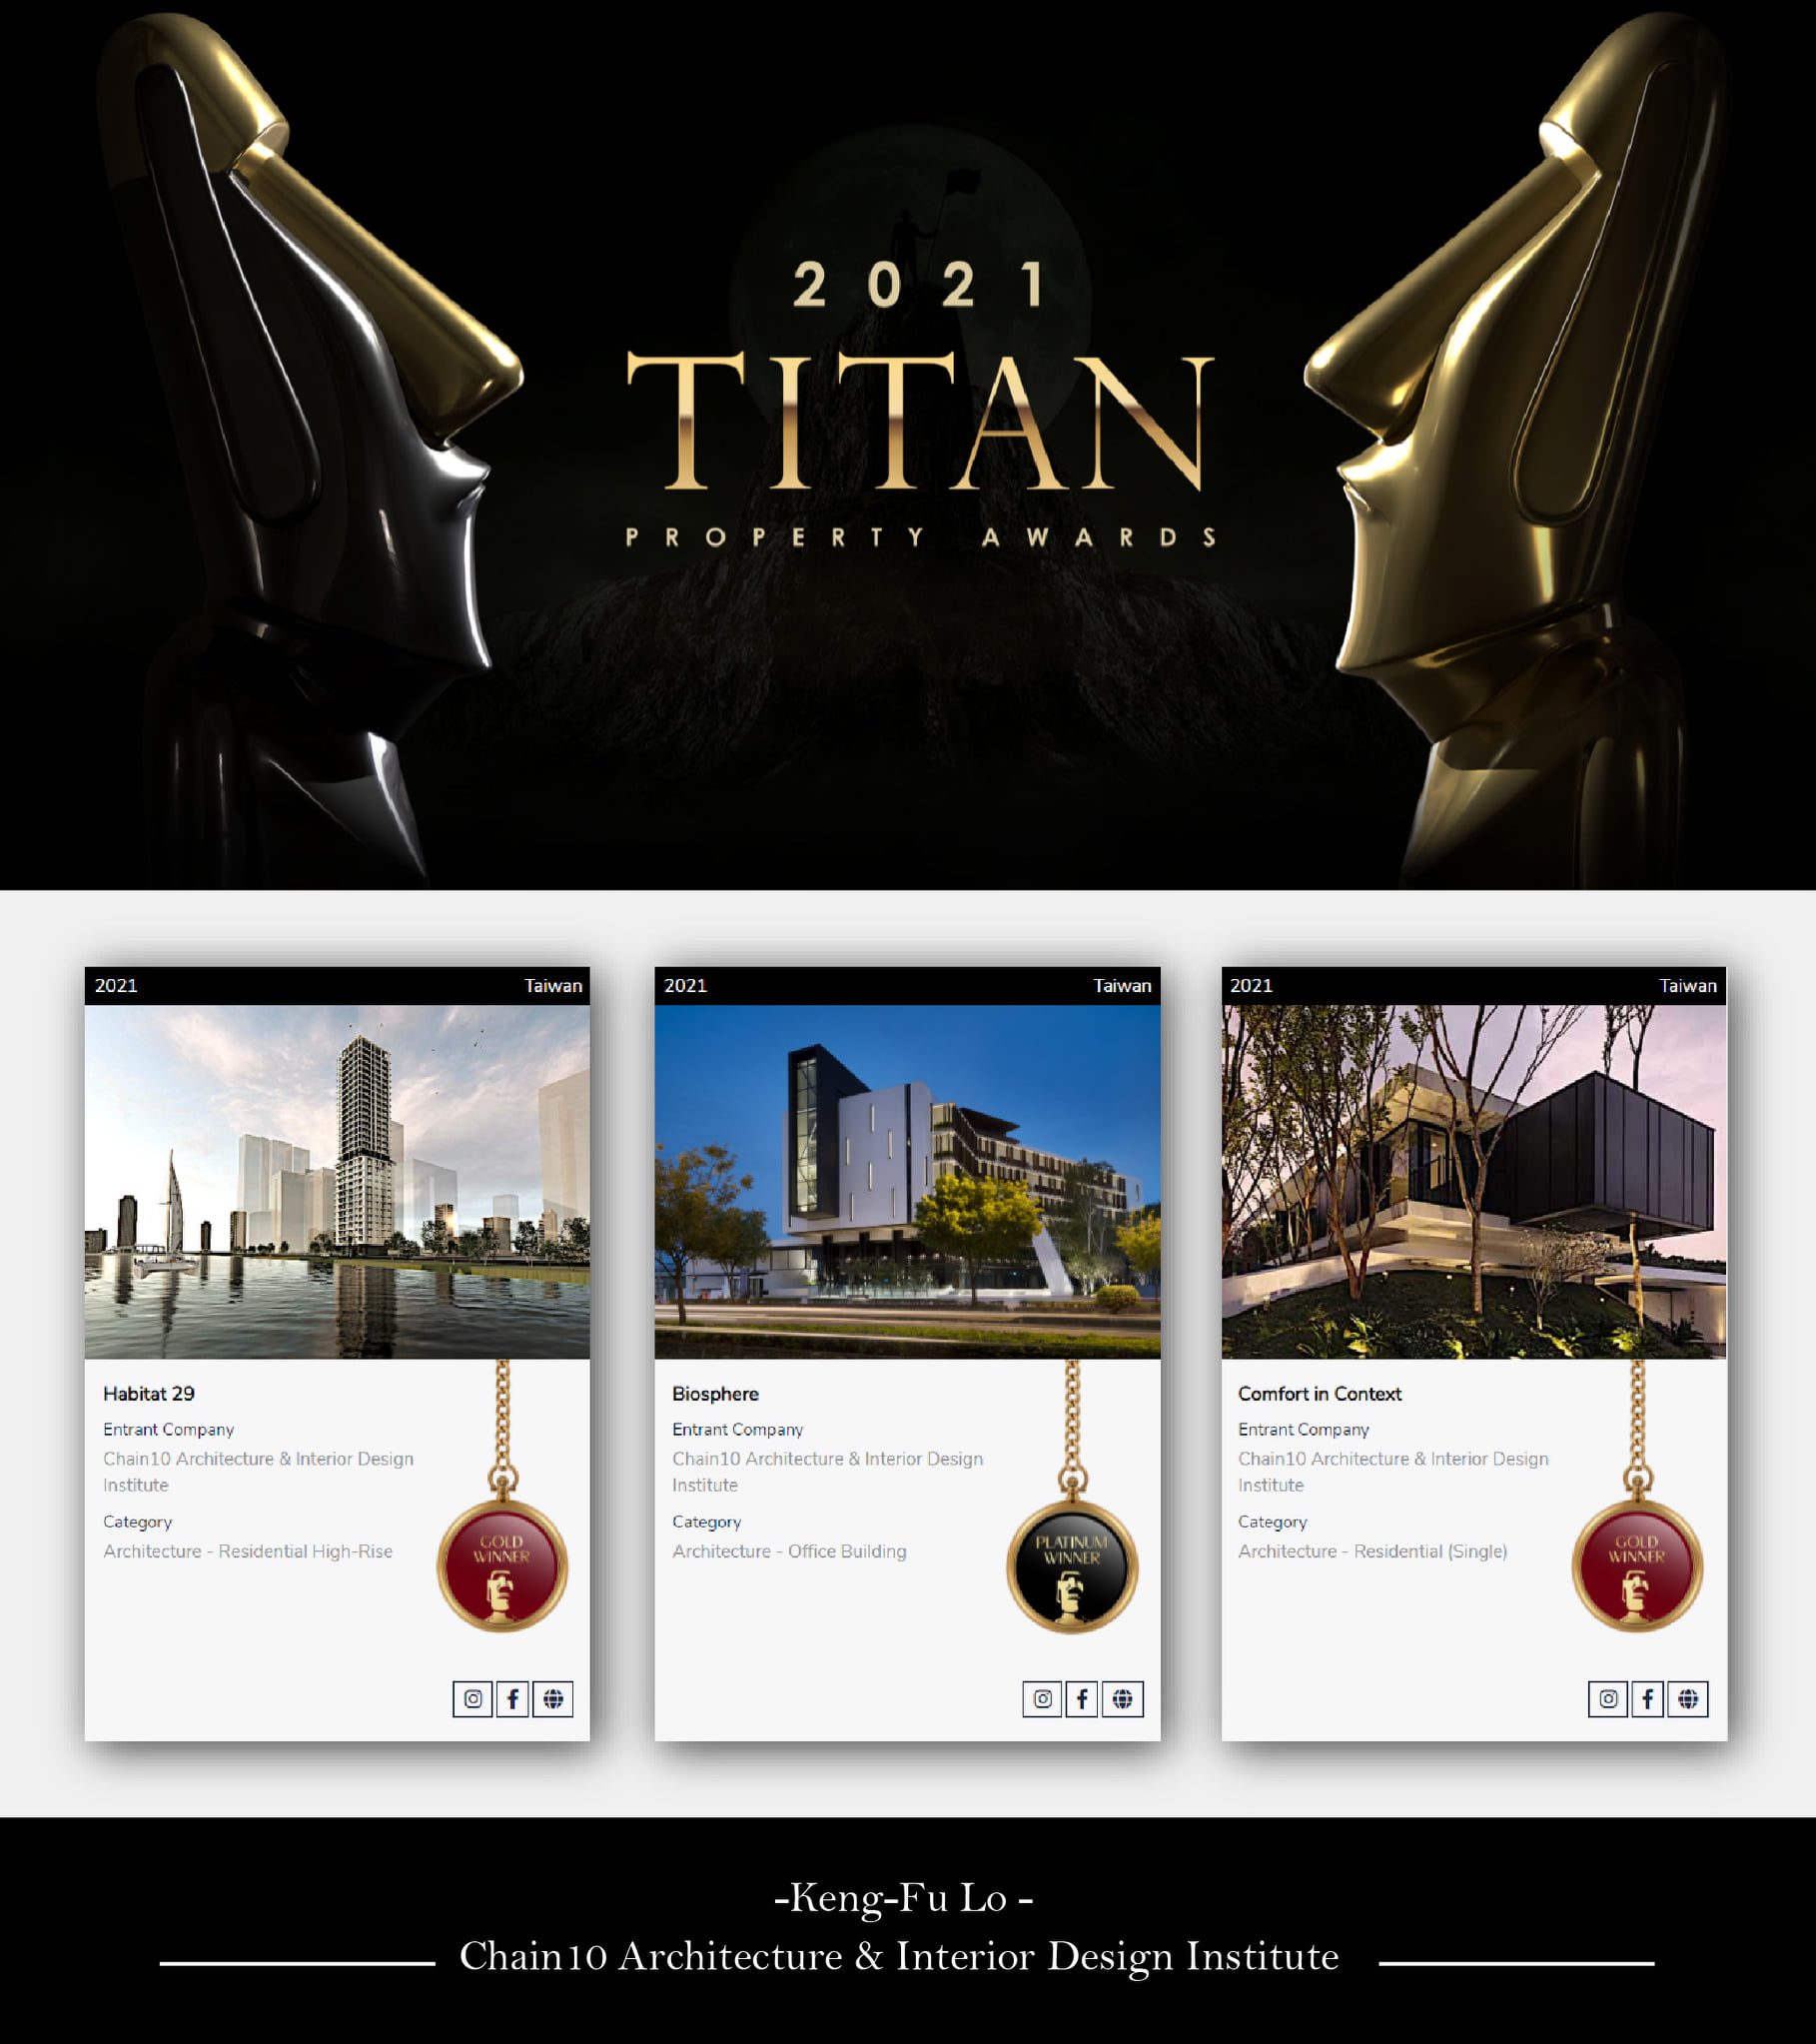 2021 The TITAN Property Awards recently announced the winner list.